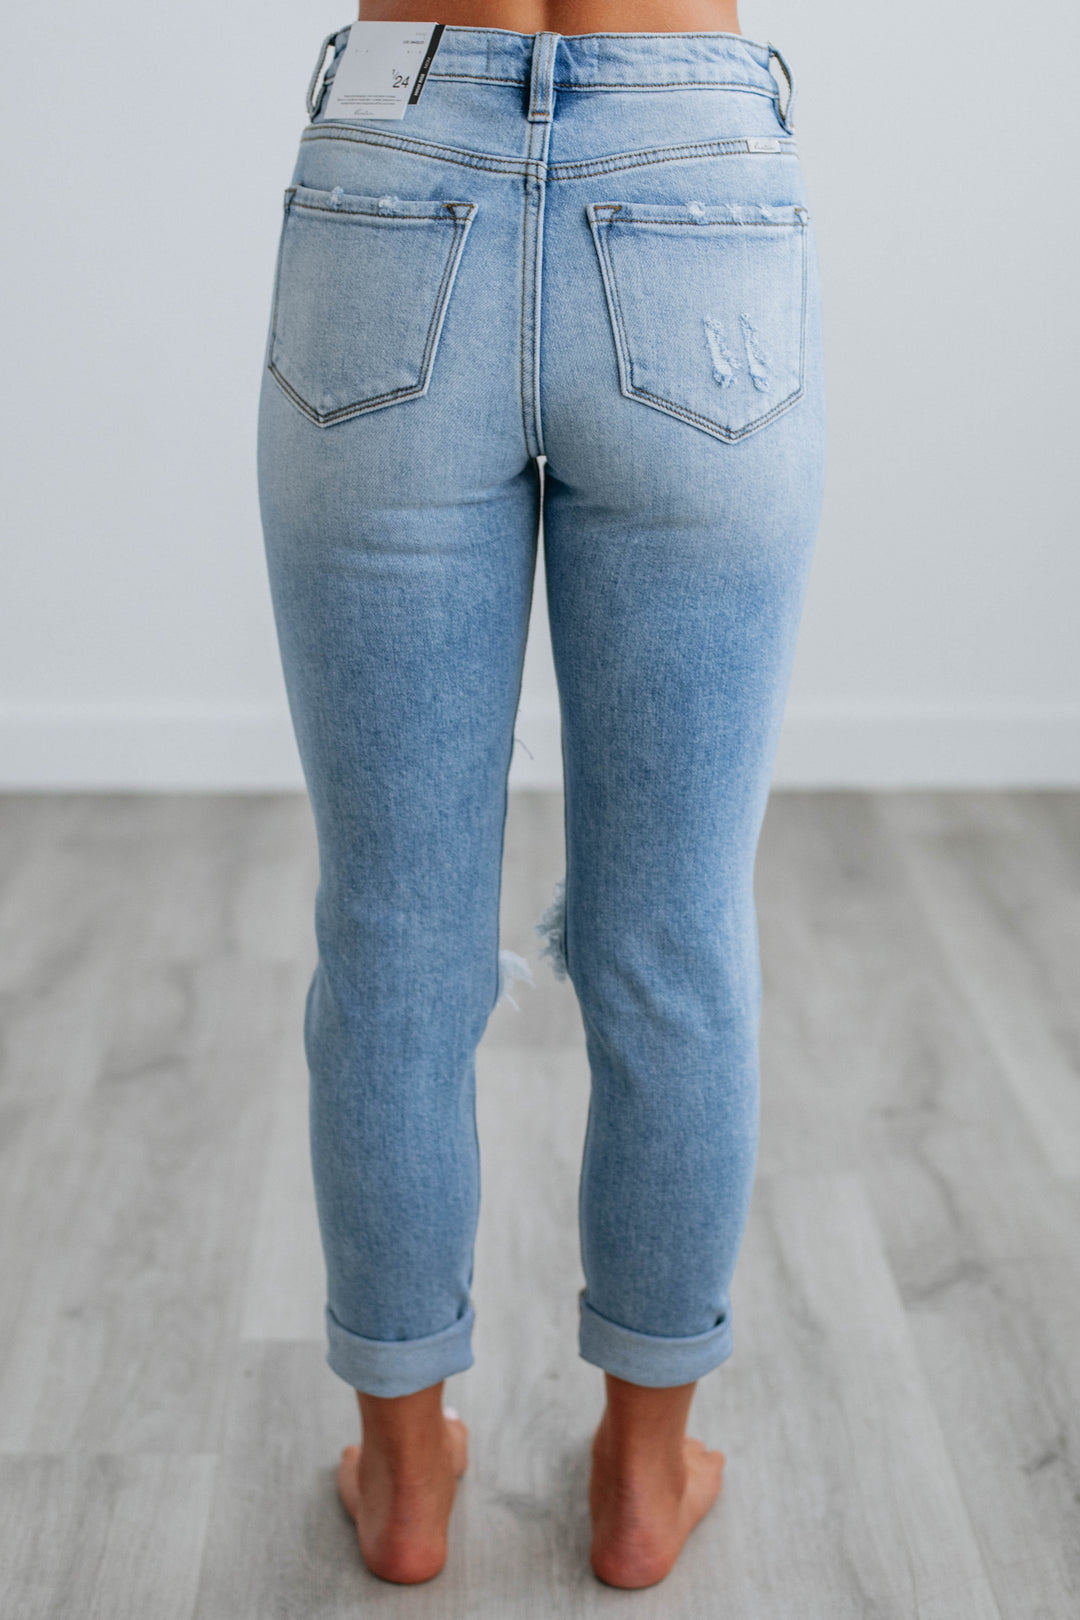 Kendall KanCan Jeans